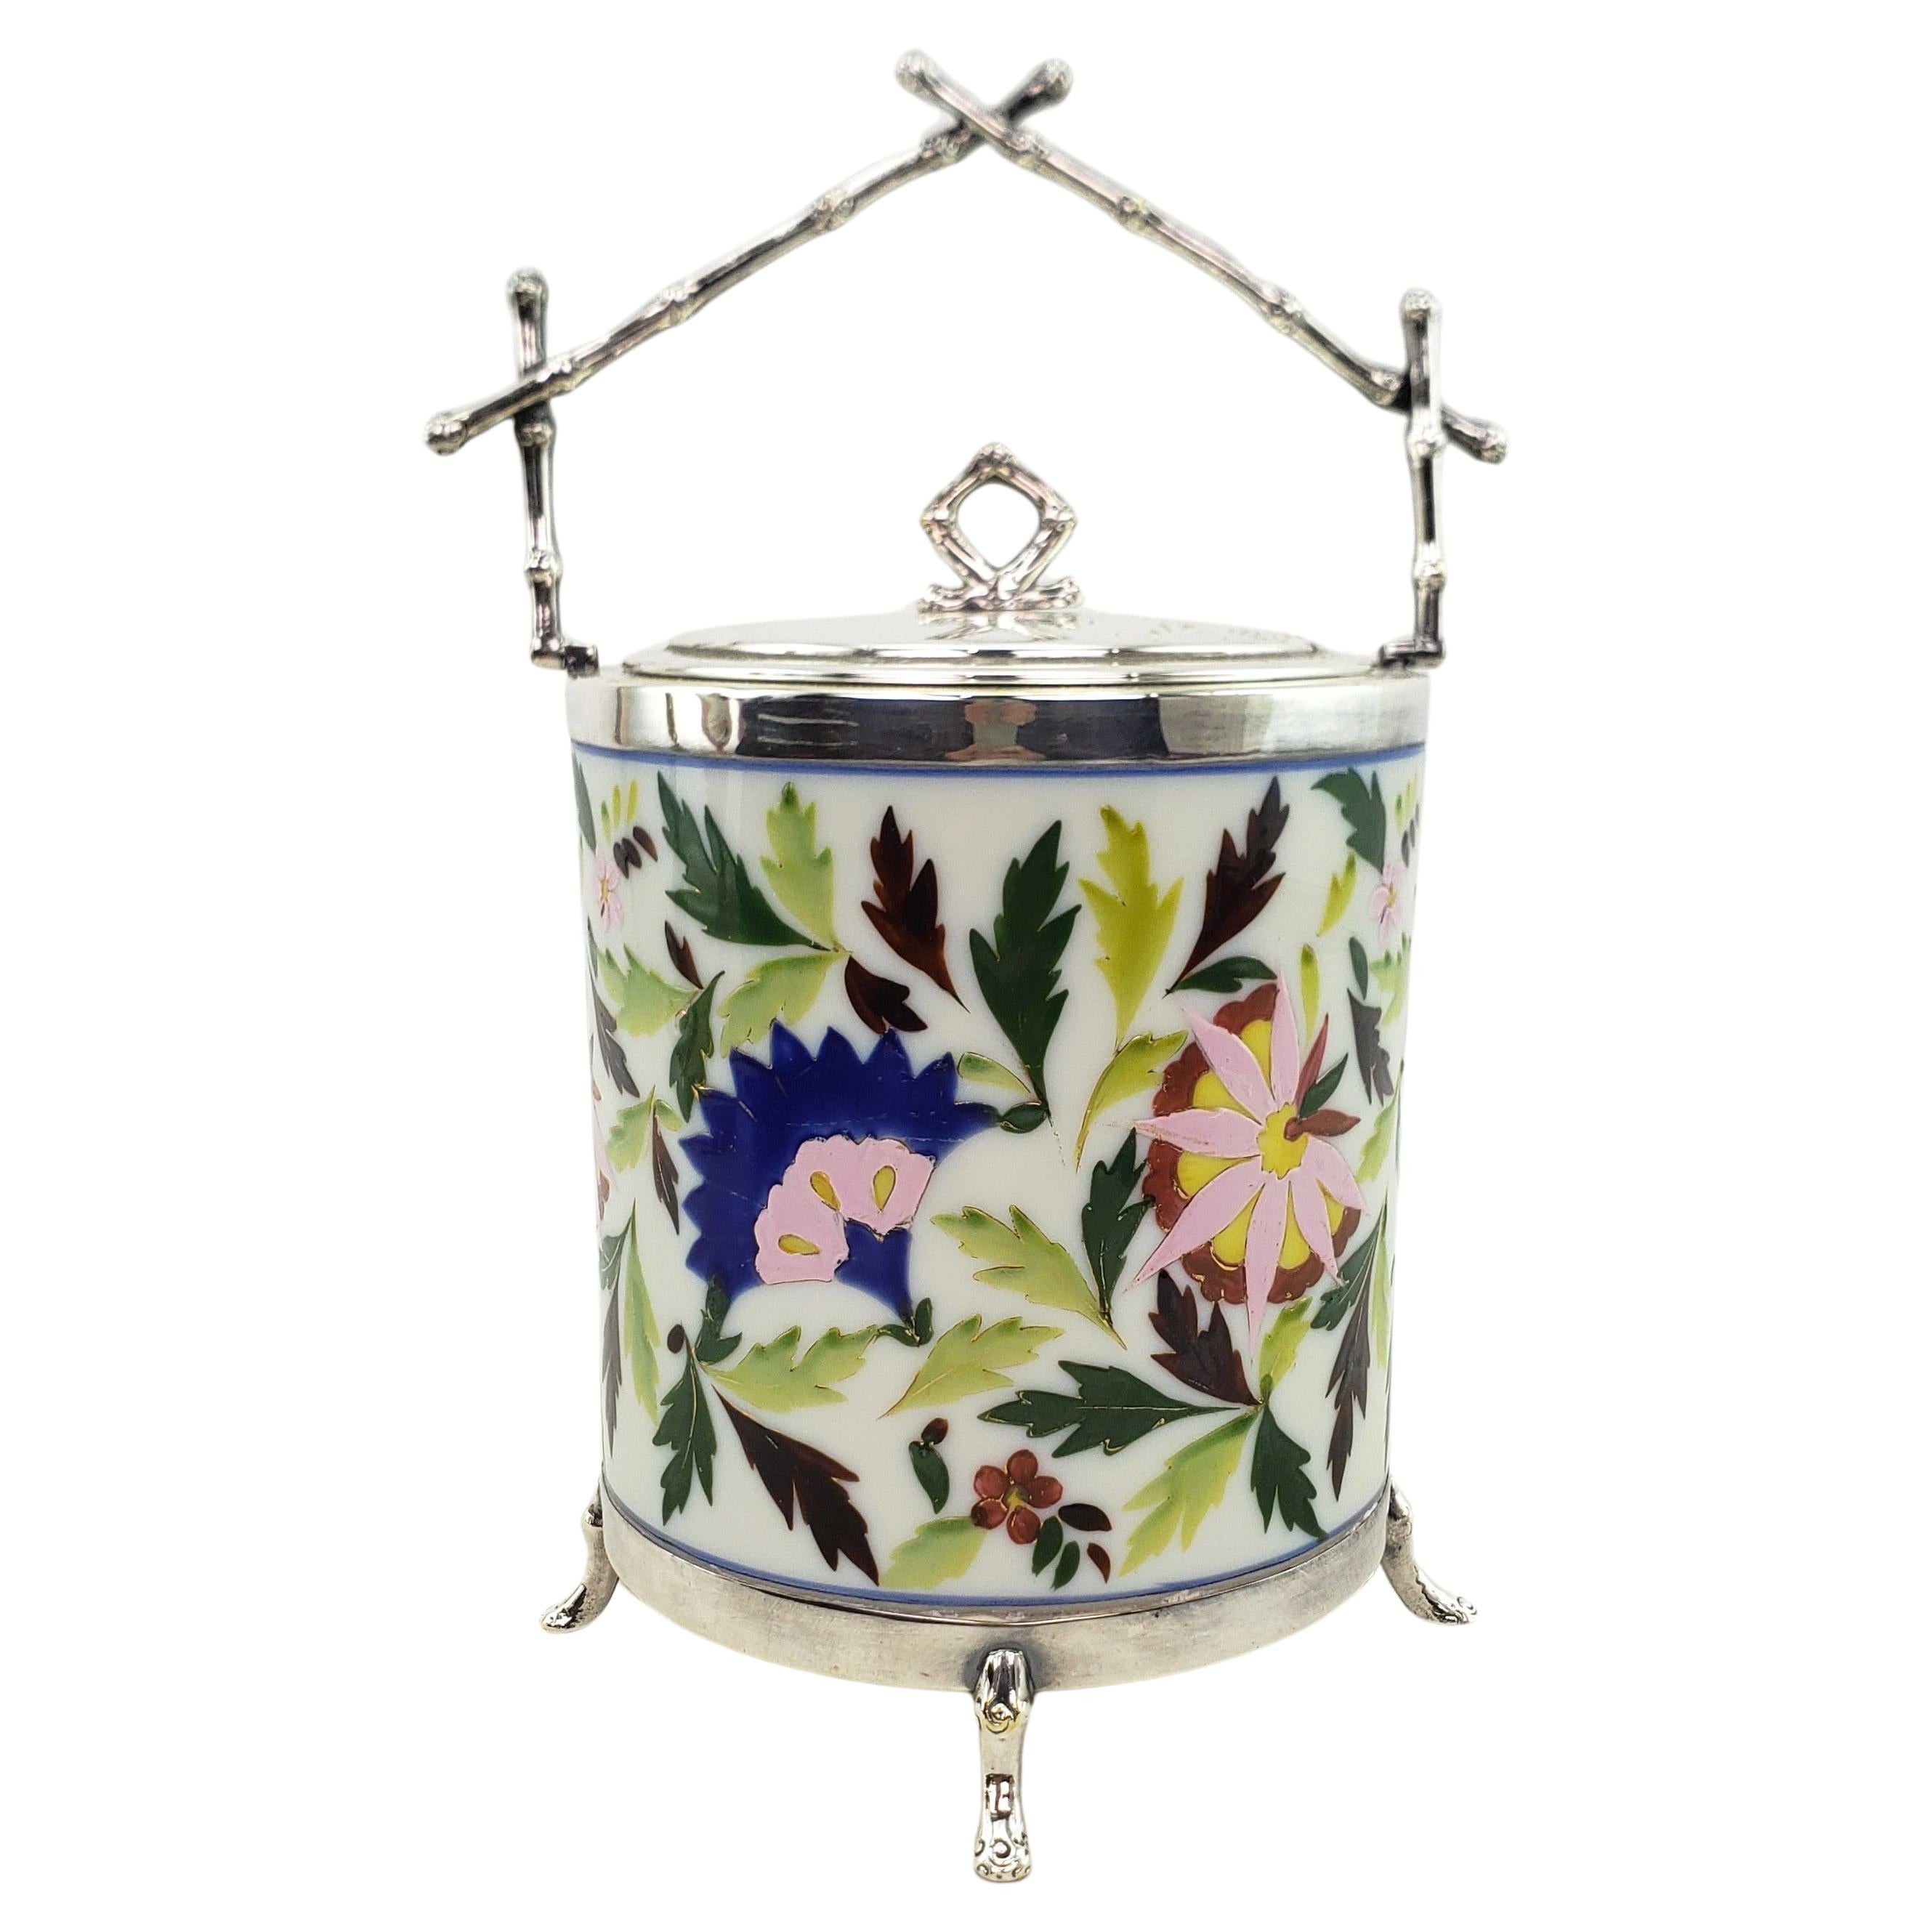  Silver Plated & Ceramic Biscuit Barrel with Floral Decoration & Twig Handle For Sale